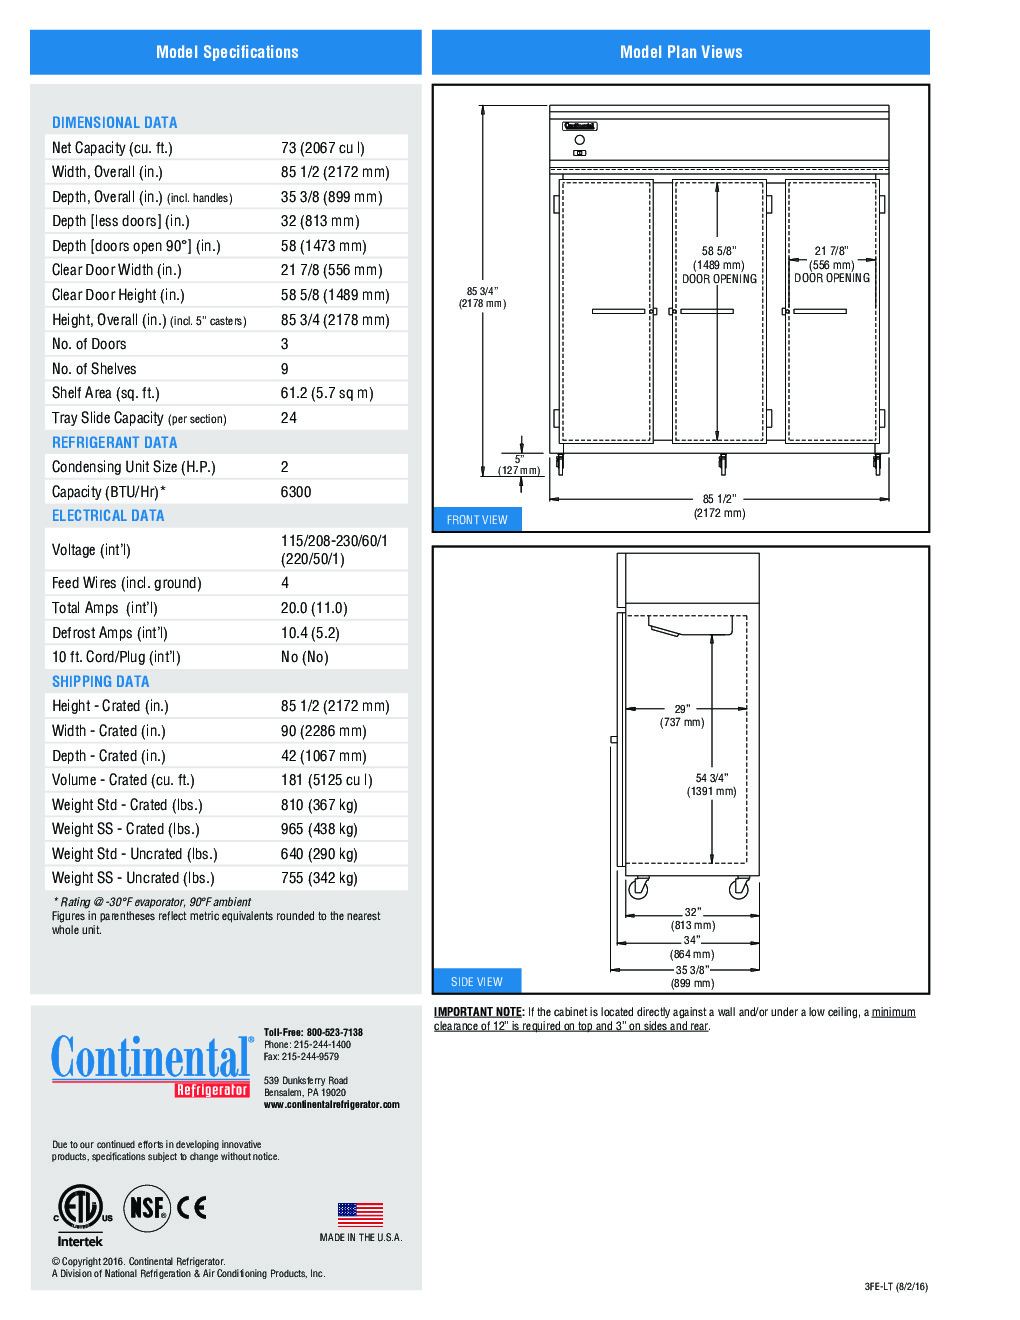 Continental Refrigerator 3FE-LT-SS Reach-In Low Temperature Freezer